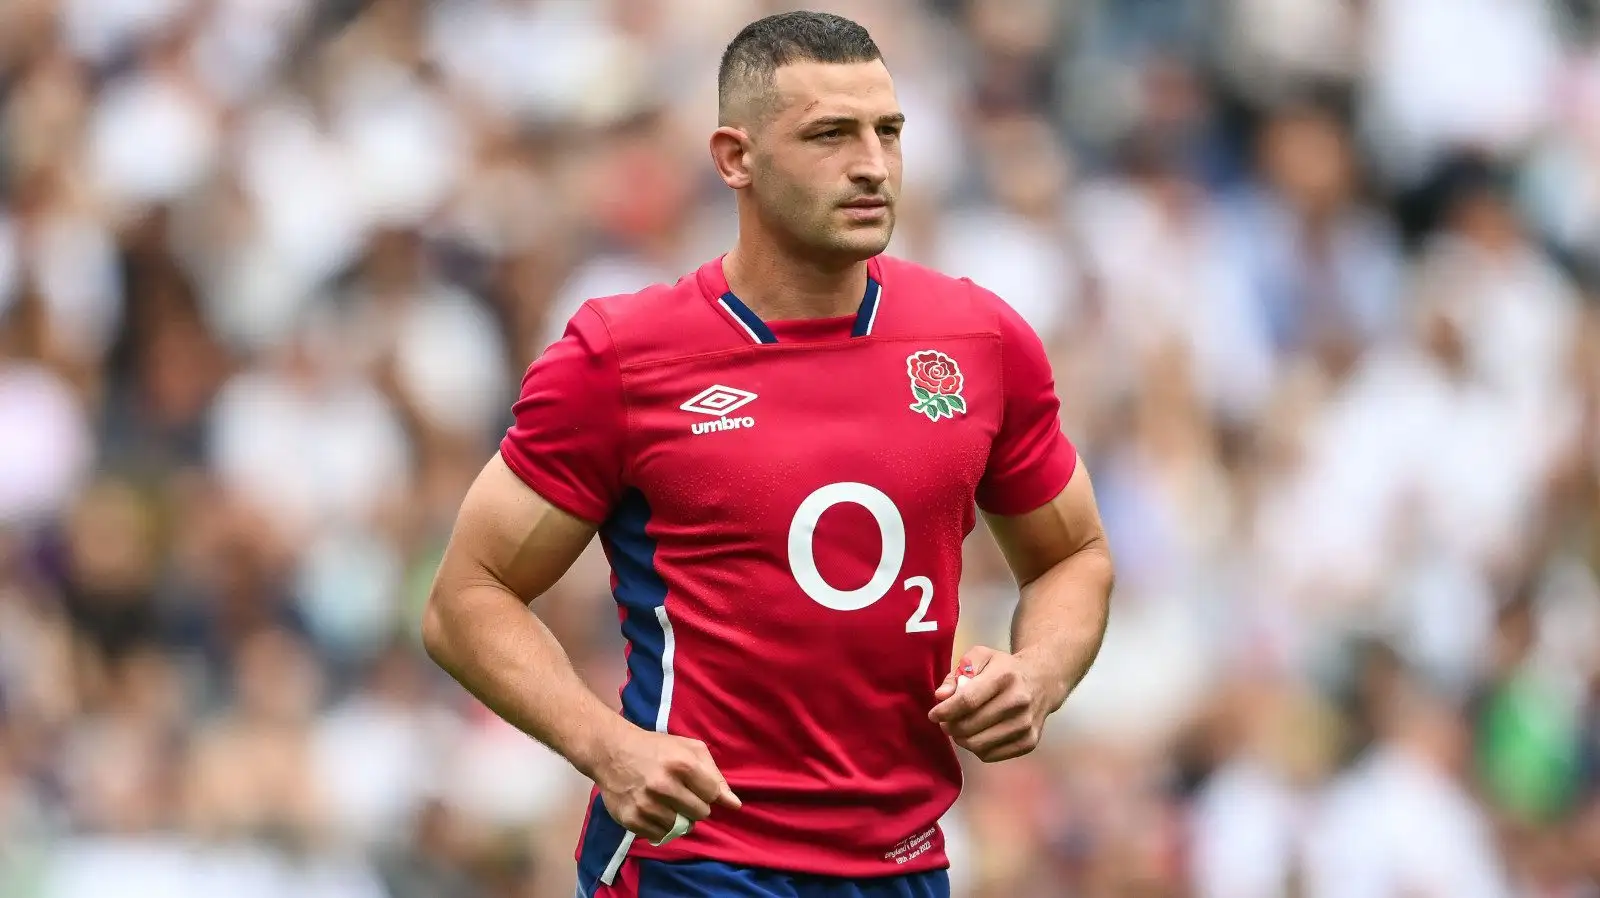 England's Jonny May looks on during a Test match